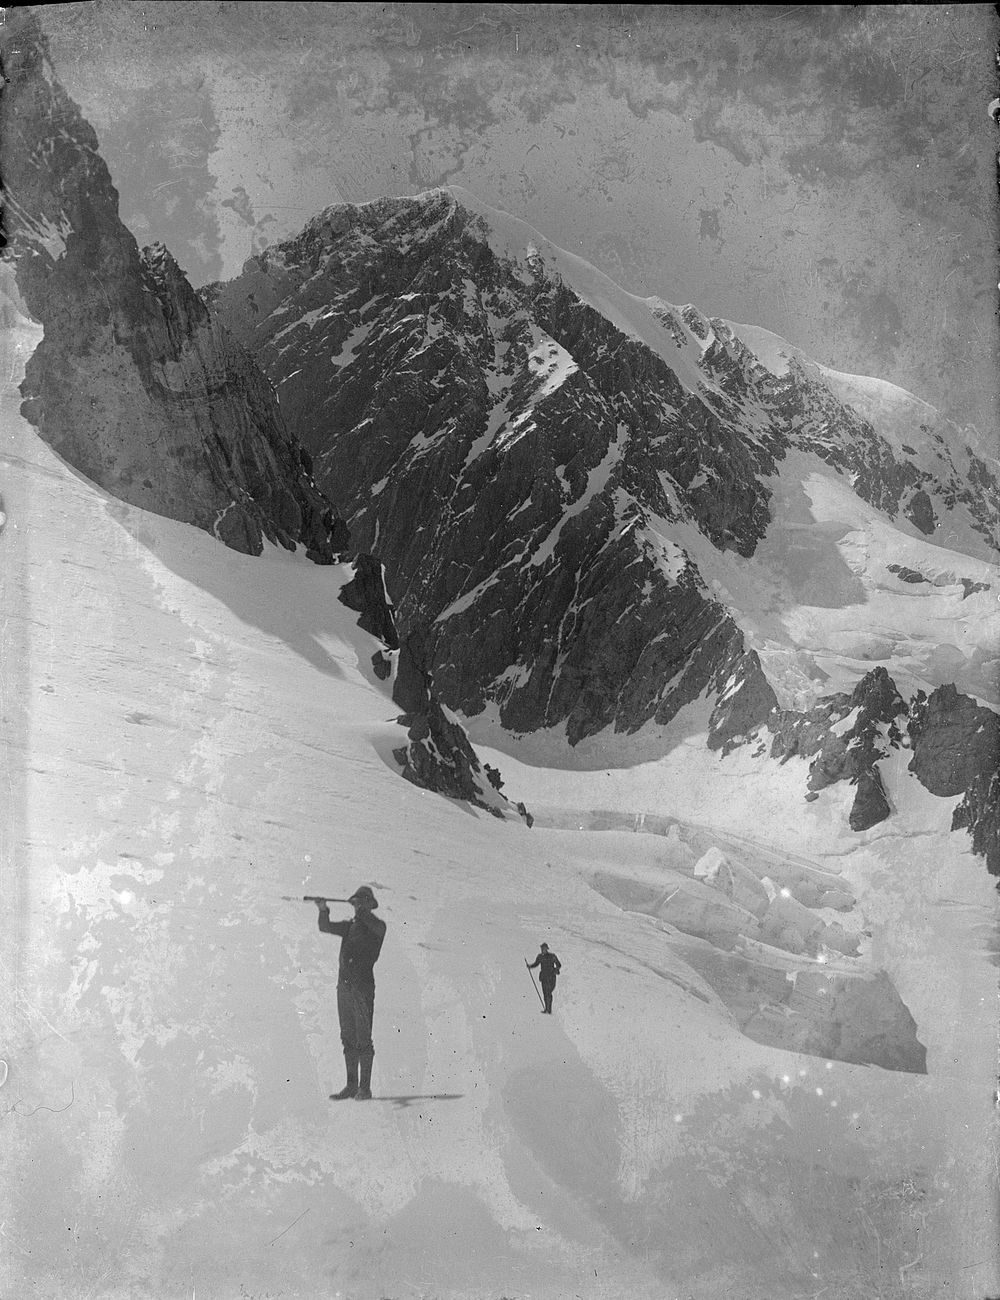 Mount Cook from Harper Saddle (1911) by Fred Brockett.